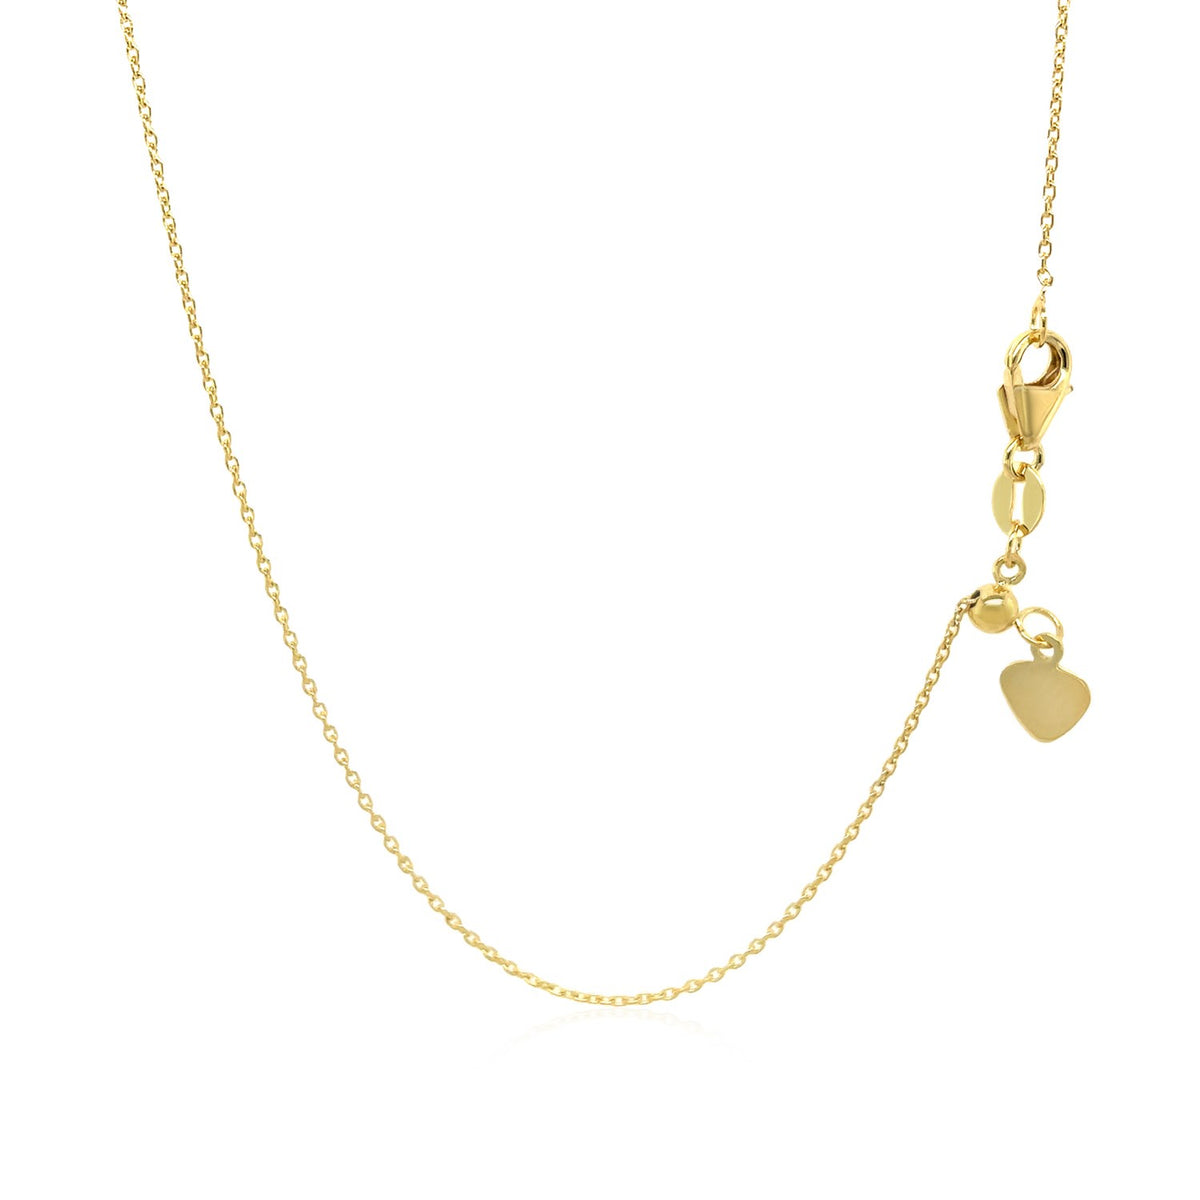 Adjustable Cable Chain - 14k Yellow Gold 0.97mm